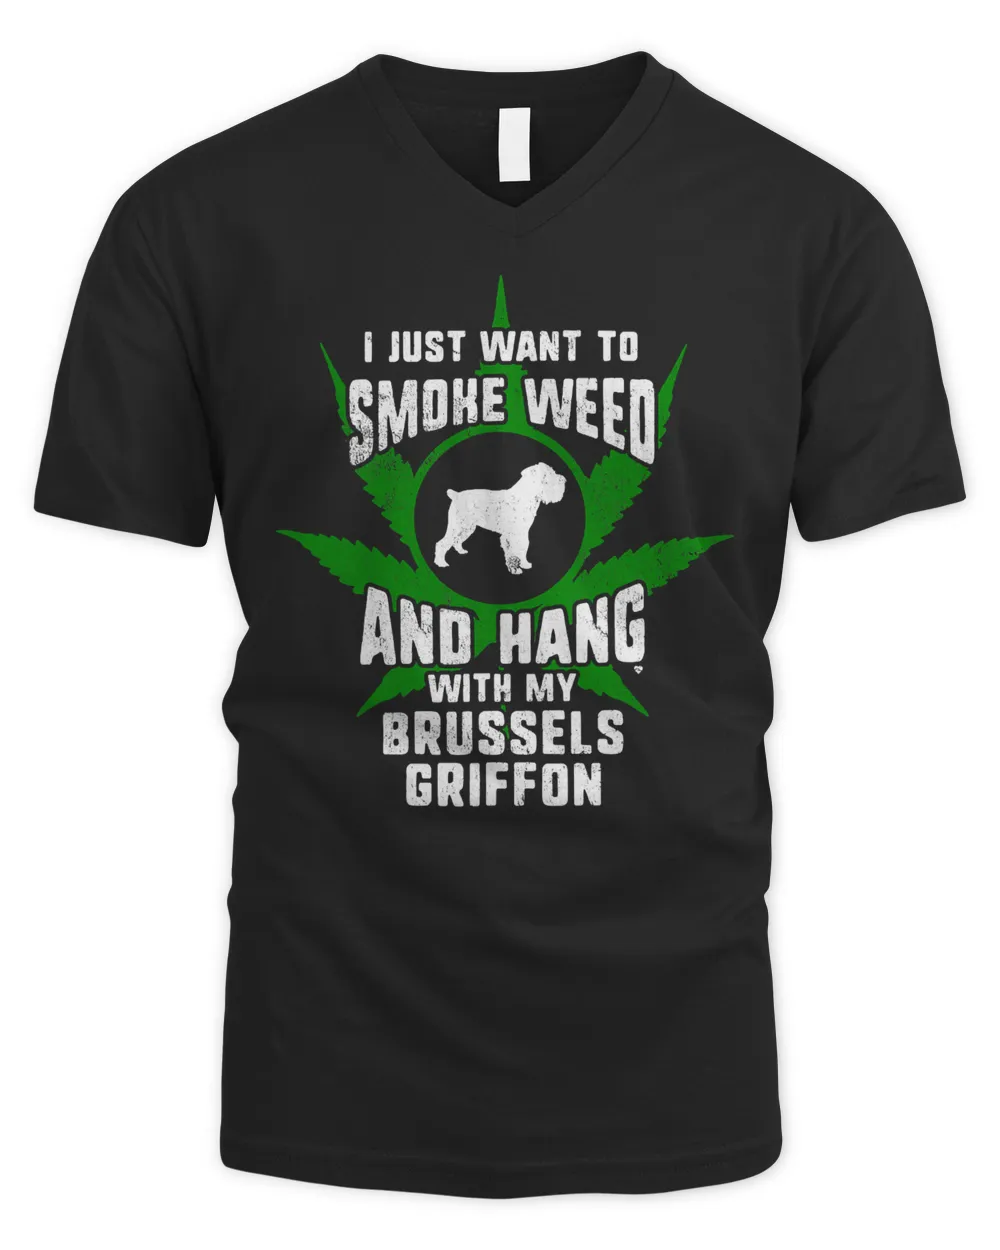 Weed And Hang With My Brussels Griffon Funny T-Shirt